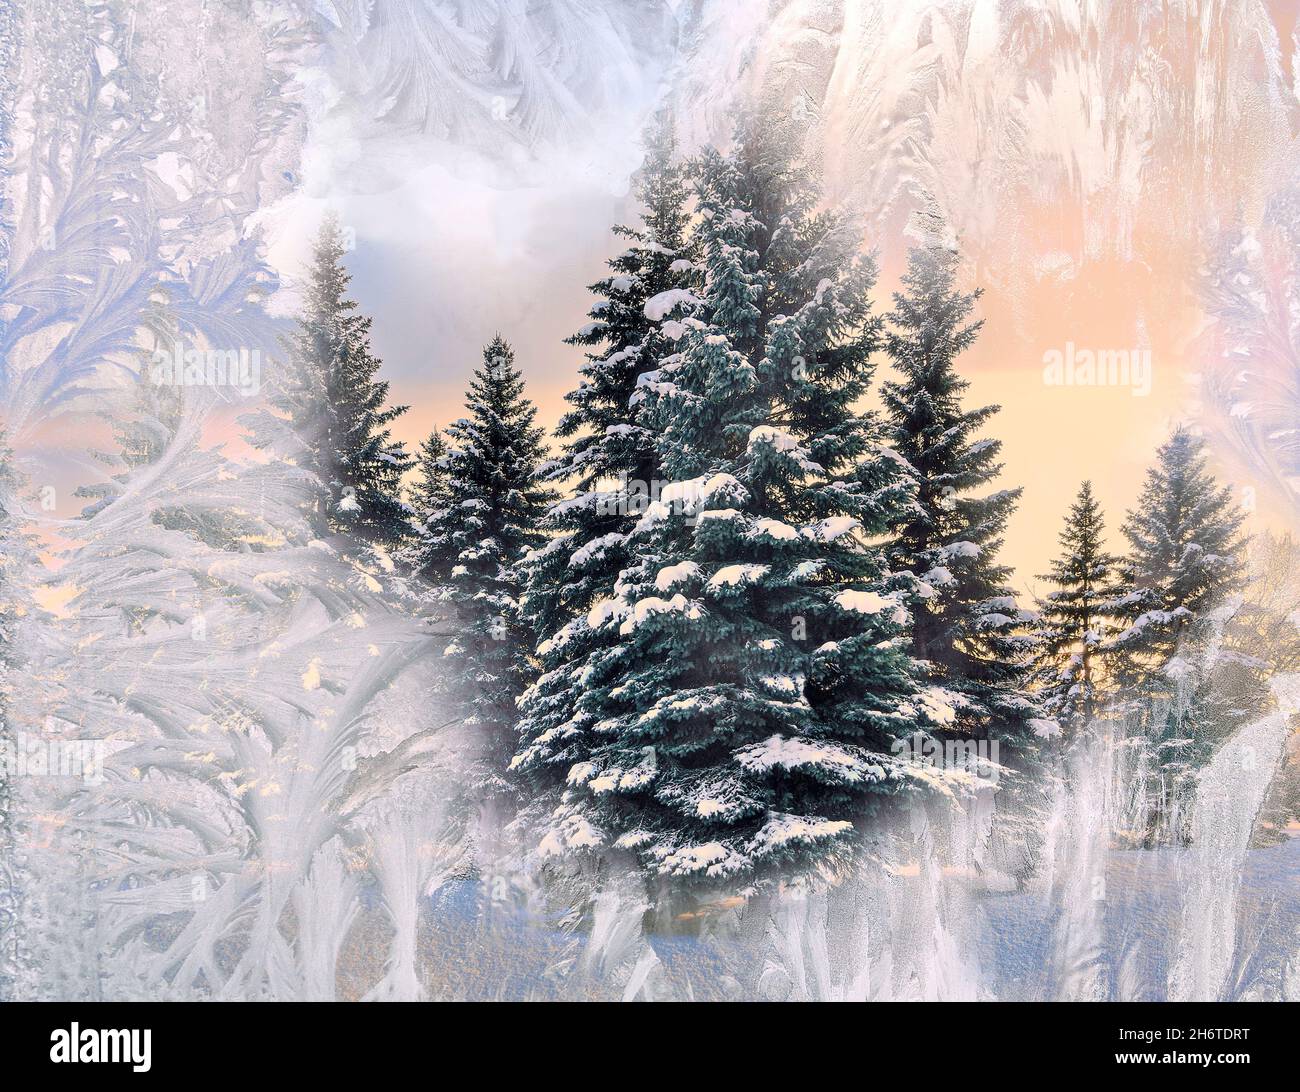 View of fabulous snowy fir trees in pink sunset through a window glass covered with frosty patterns - beautiful Chtistmas background/ Merry Christmas Stock Photo